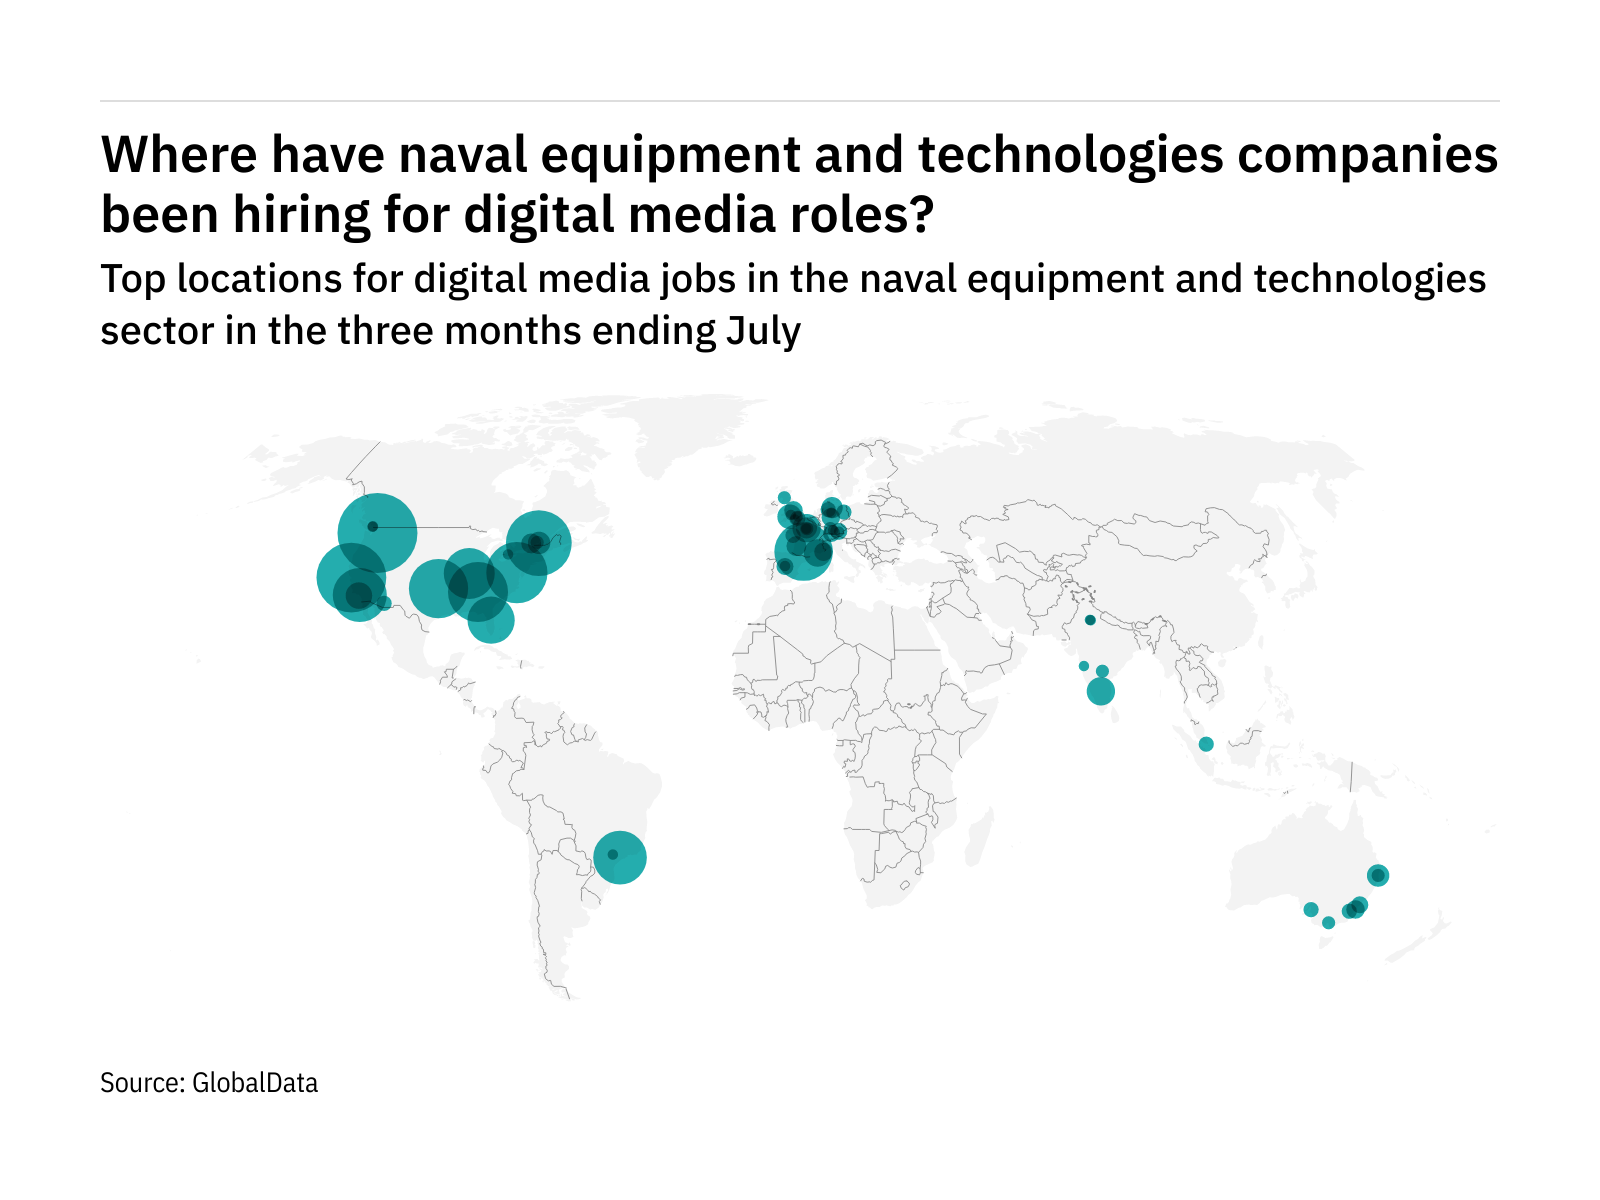 South & Central America is seeing a hiring jump in naval industry digital media roles